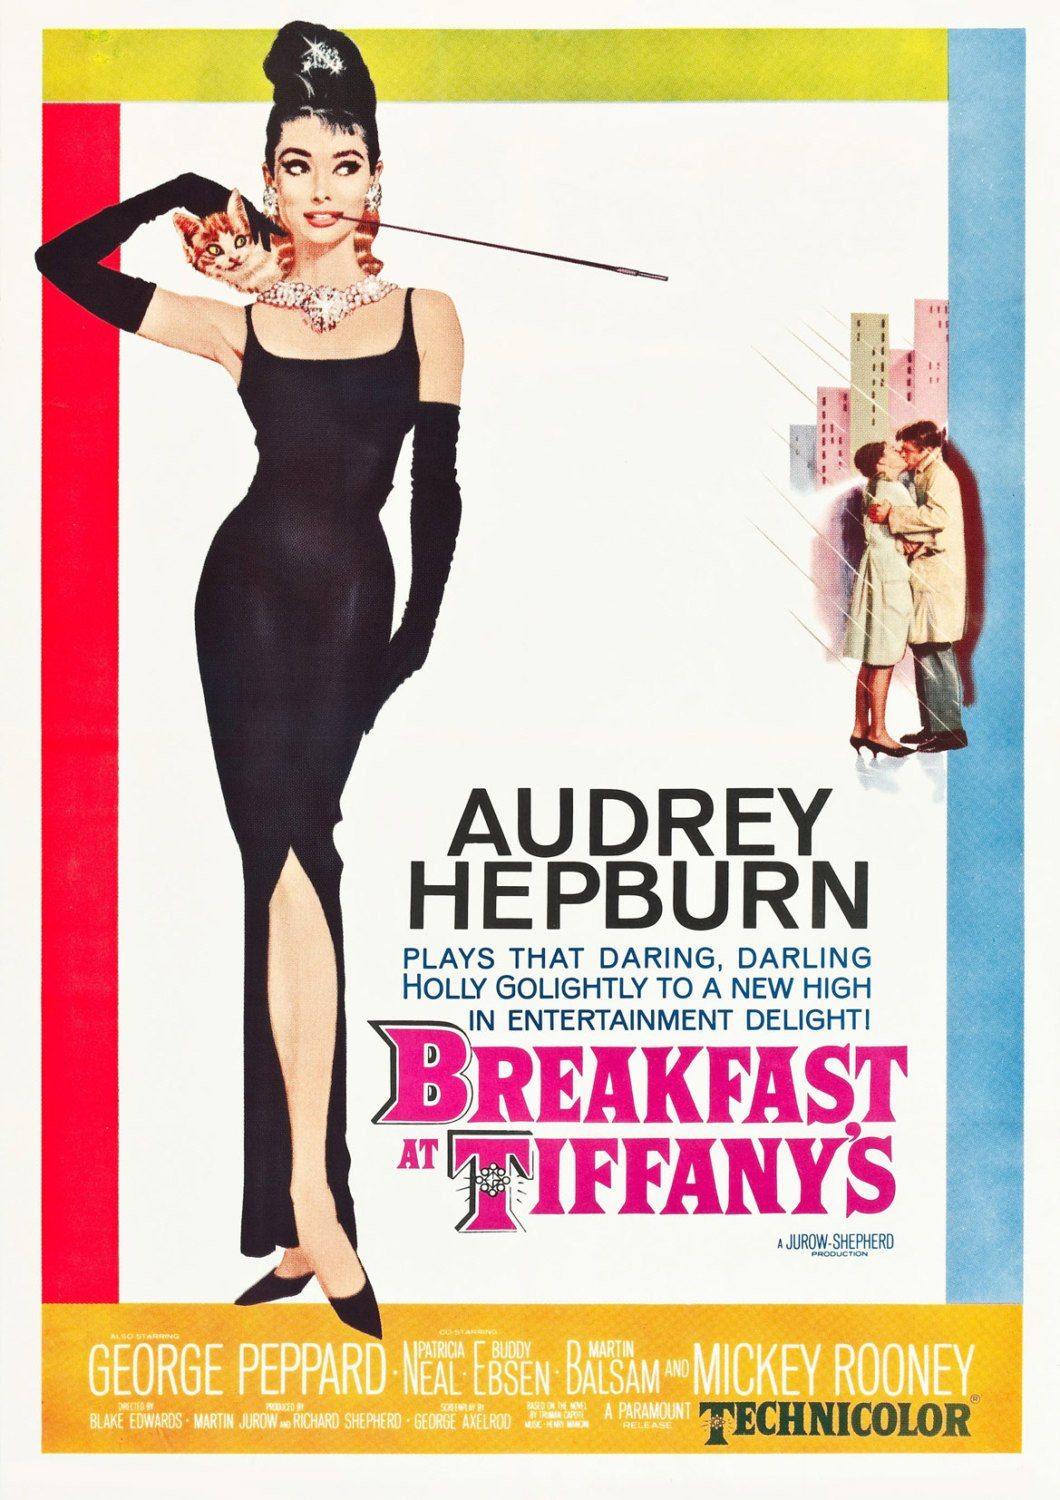 BREAKFAST AT TIFFANY'S: Classic Hollywood Movie Poster Art Reprint - Pimlico Prints